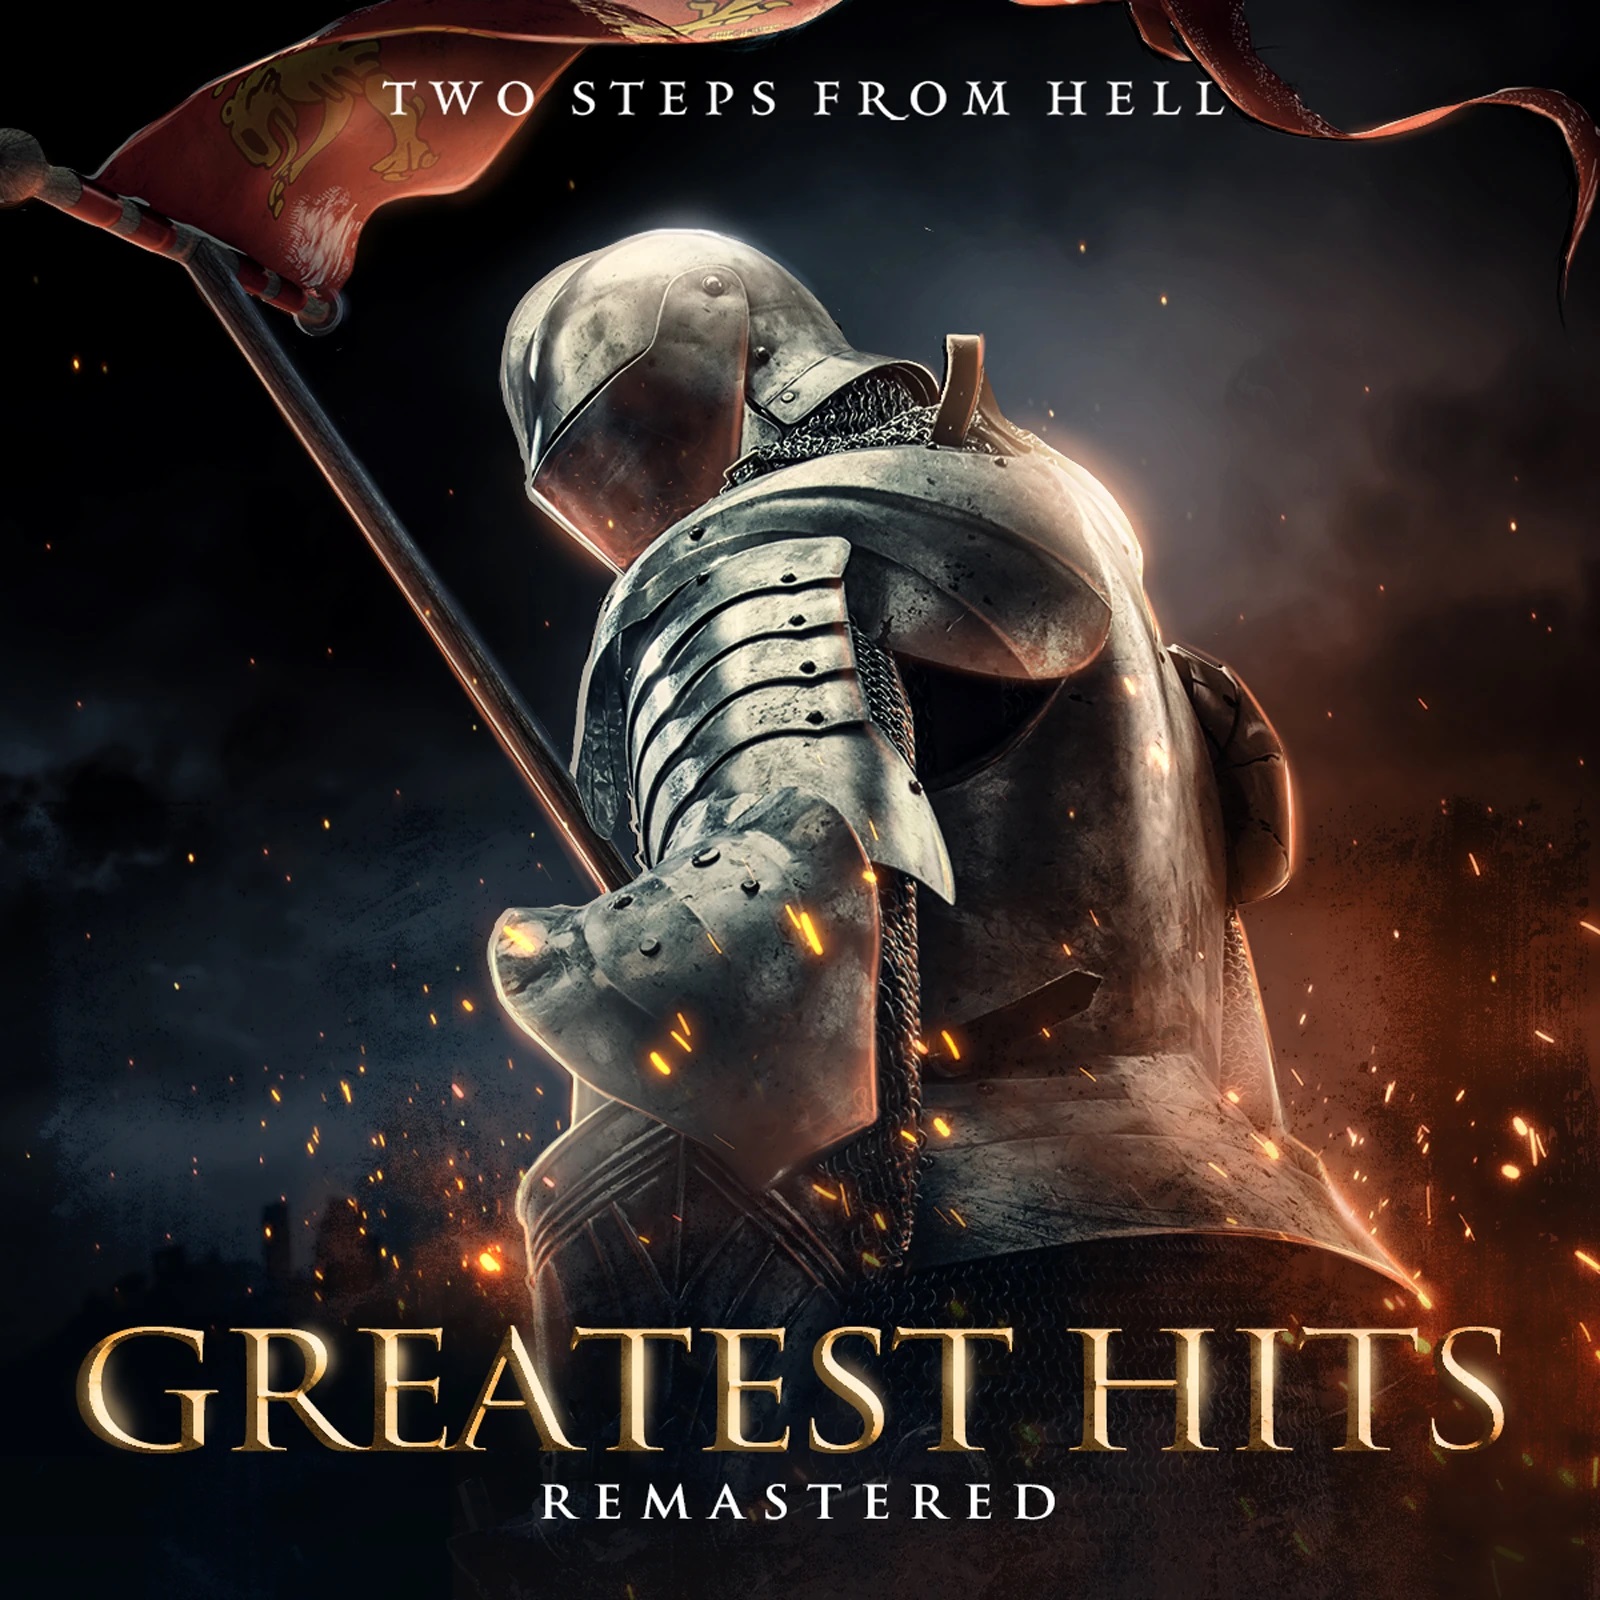 Two Steps From Hell - Greatest Hits: Remastered (2020) [FLAC 24bit/48kHz]